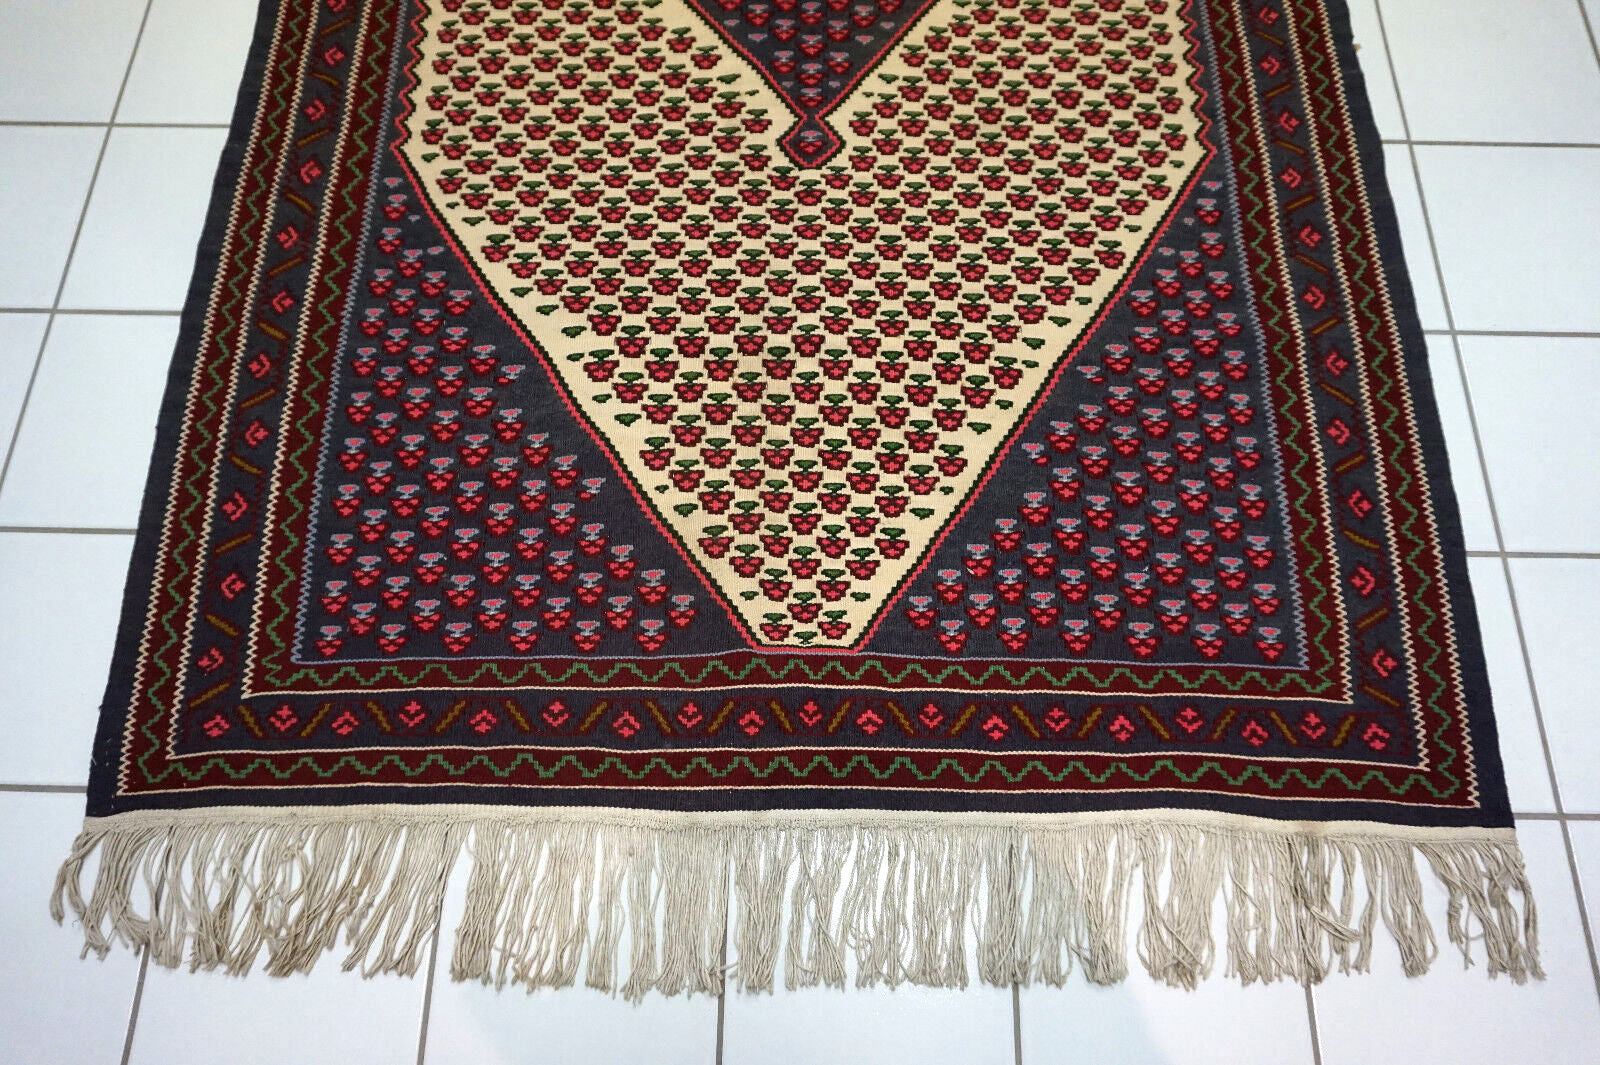 Close-up of the beige, pink, green, burgundy, and blue colors in the kilim